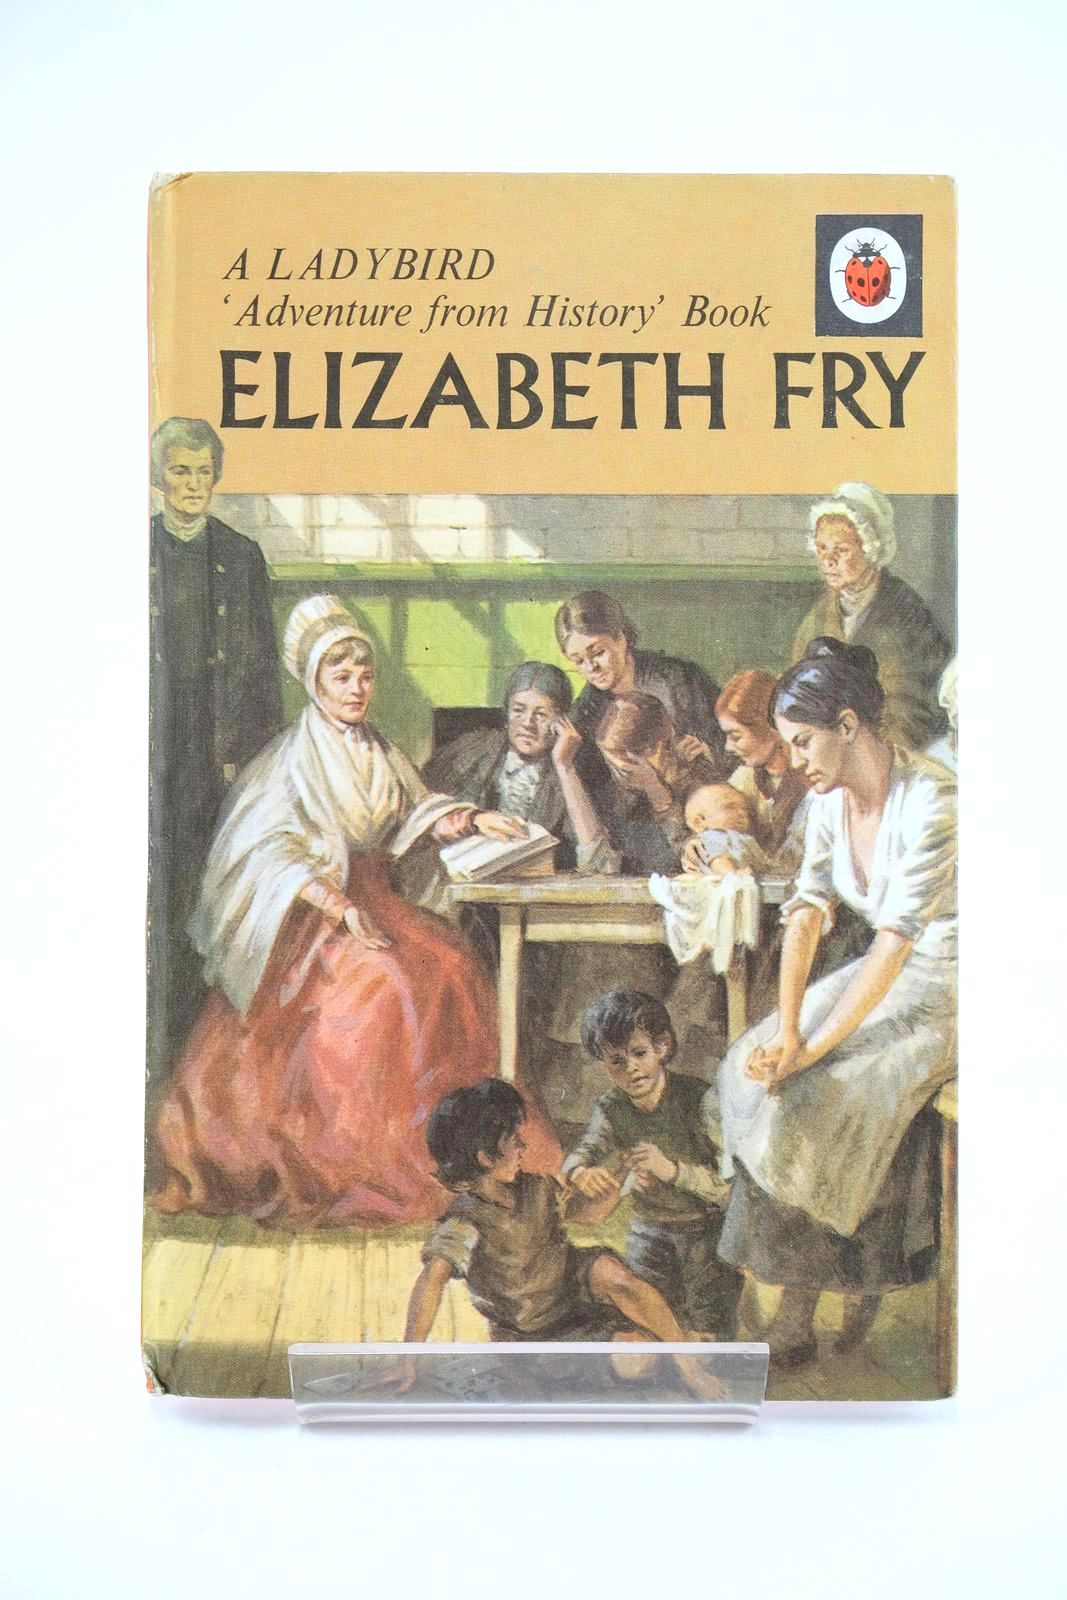 Photo of ELIZABETH FRY written by Peach, L. Du Garde illustrated by Hall, Roger published by Ladybird Books Ltd (STOCK CODE: 1324405)  for sale by Stella & Rose's Books